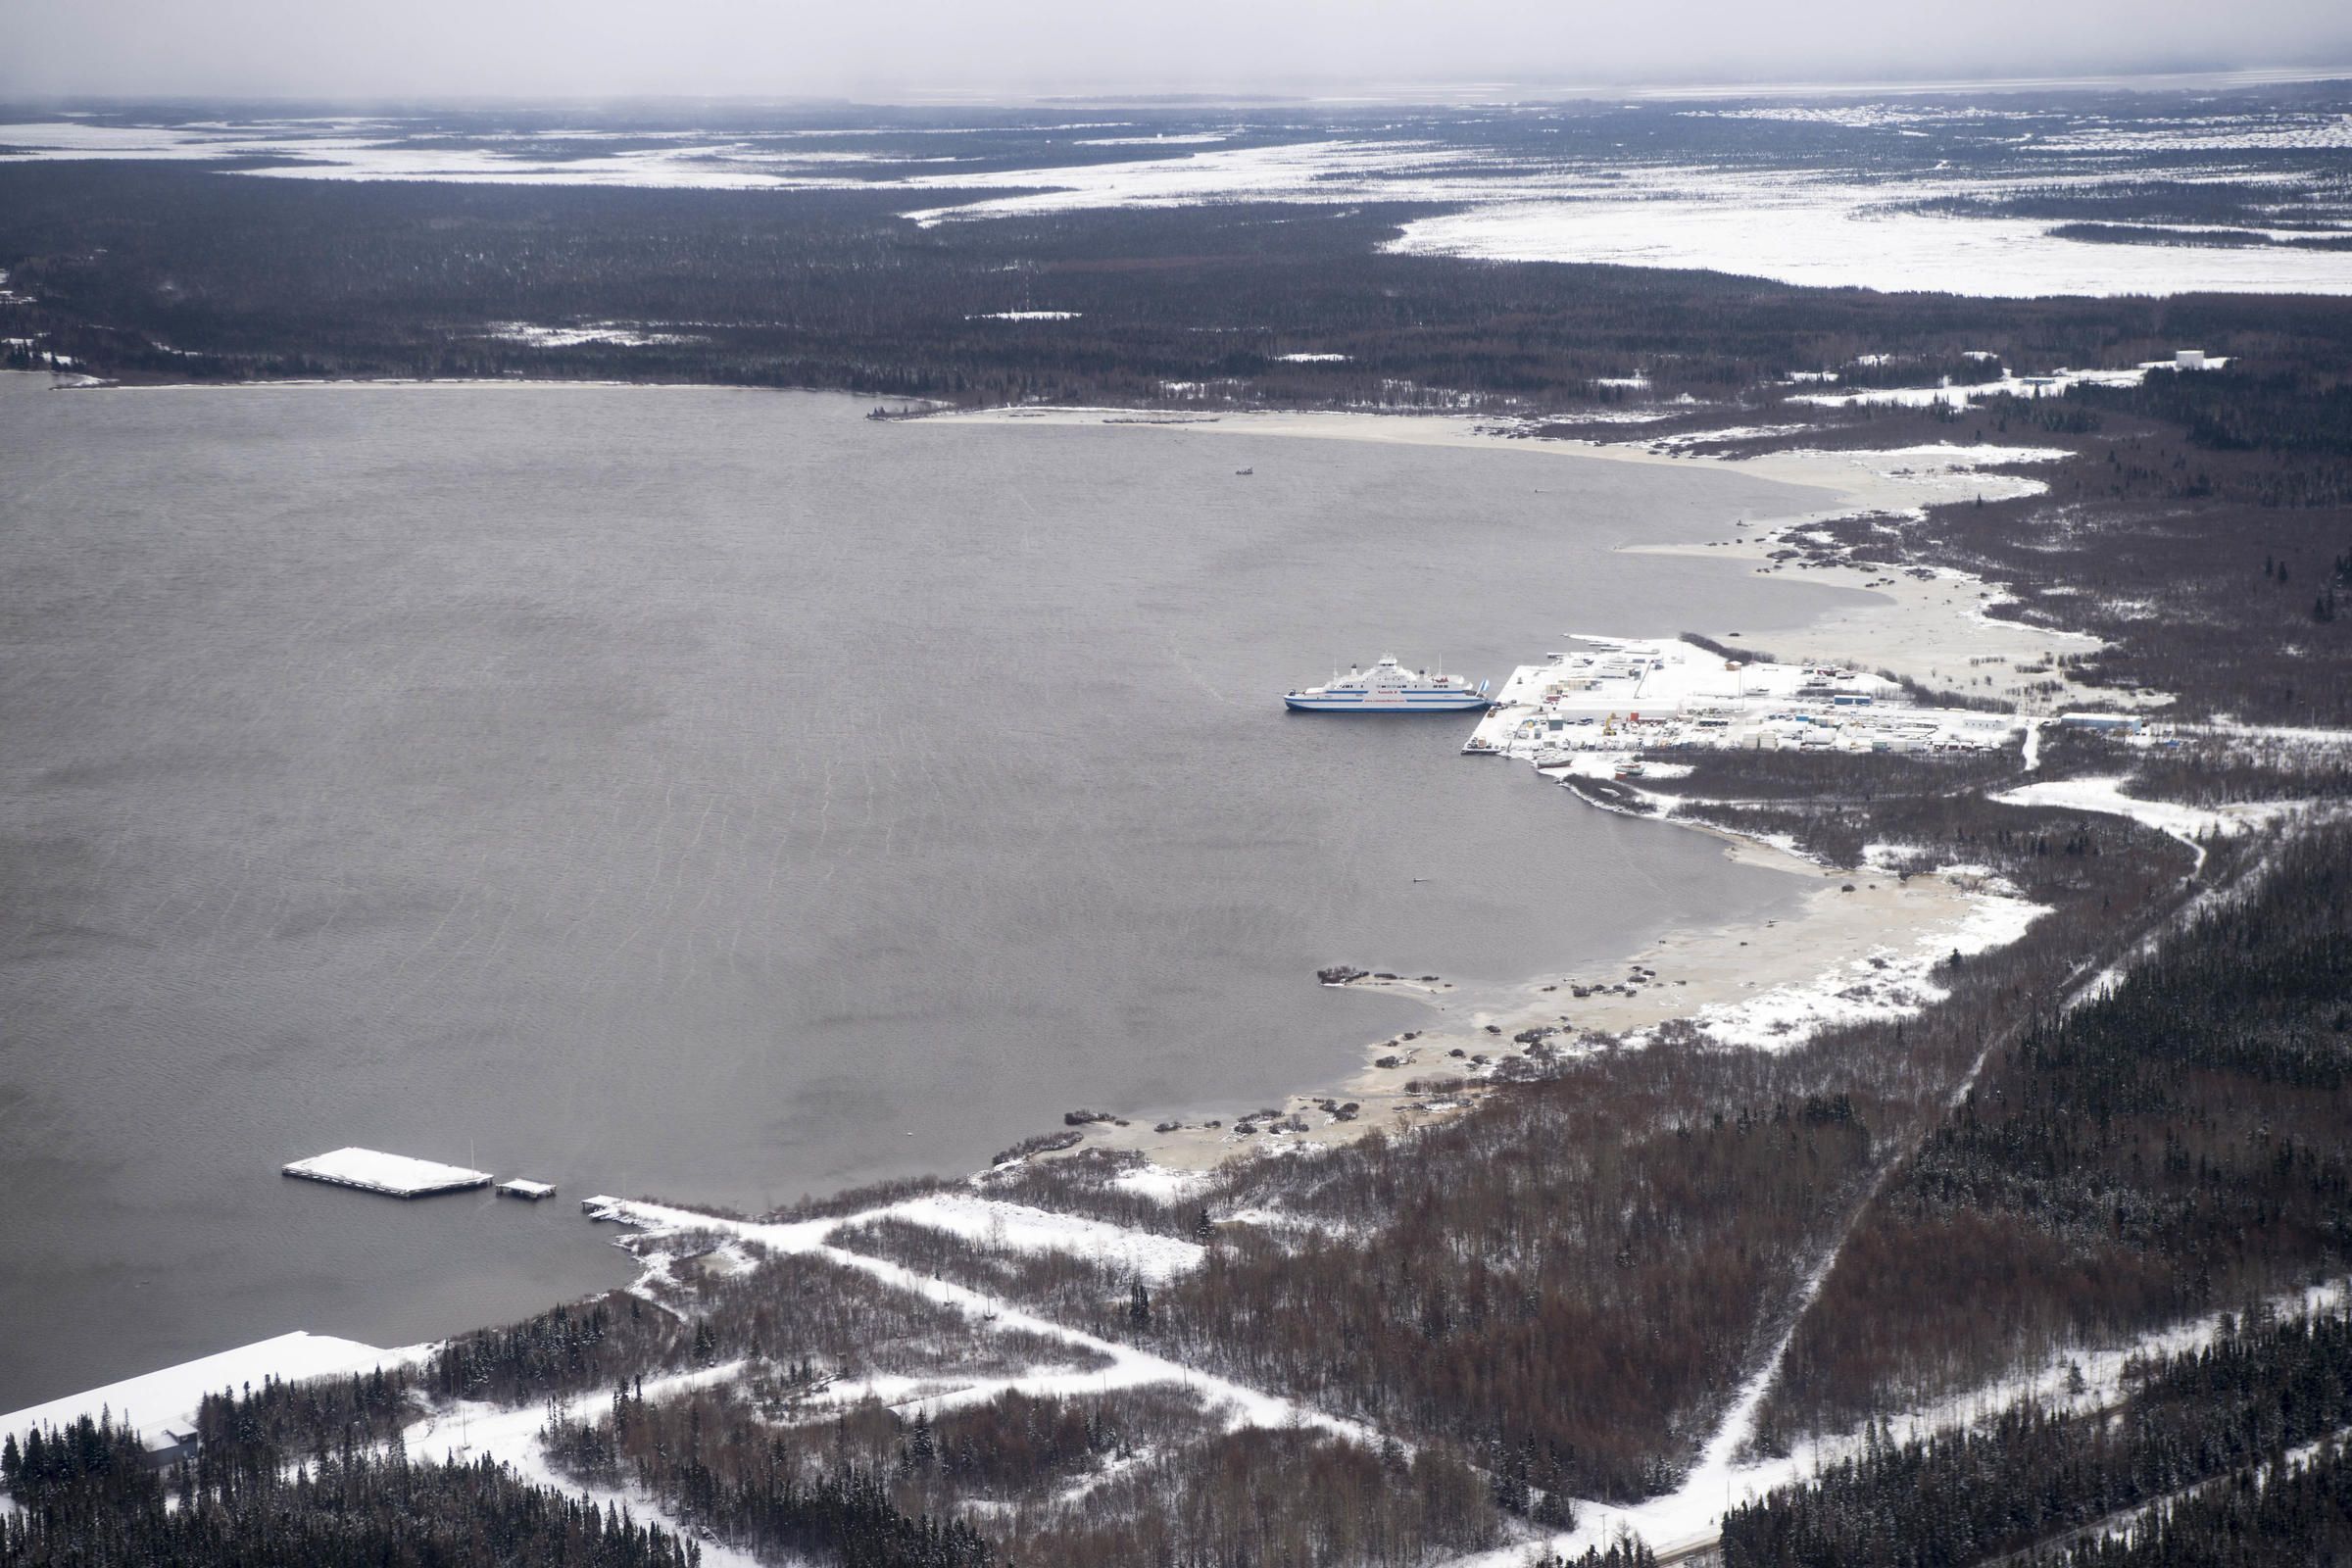 The waters from the Churchill River converge with the water from Lake Melville near Happy Valley-Goose Bay, Labrador on November 9, 2019. The ferry waits to leave the dock headed for the remote Inuit towns north of Lake Melville. Image by Michael G. Seamans. Canada, 2019.